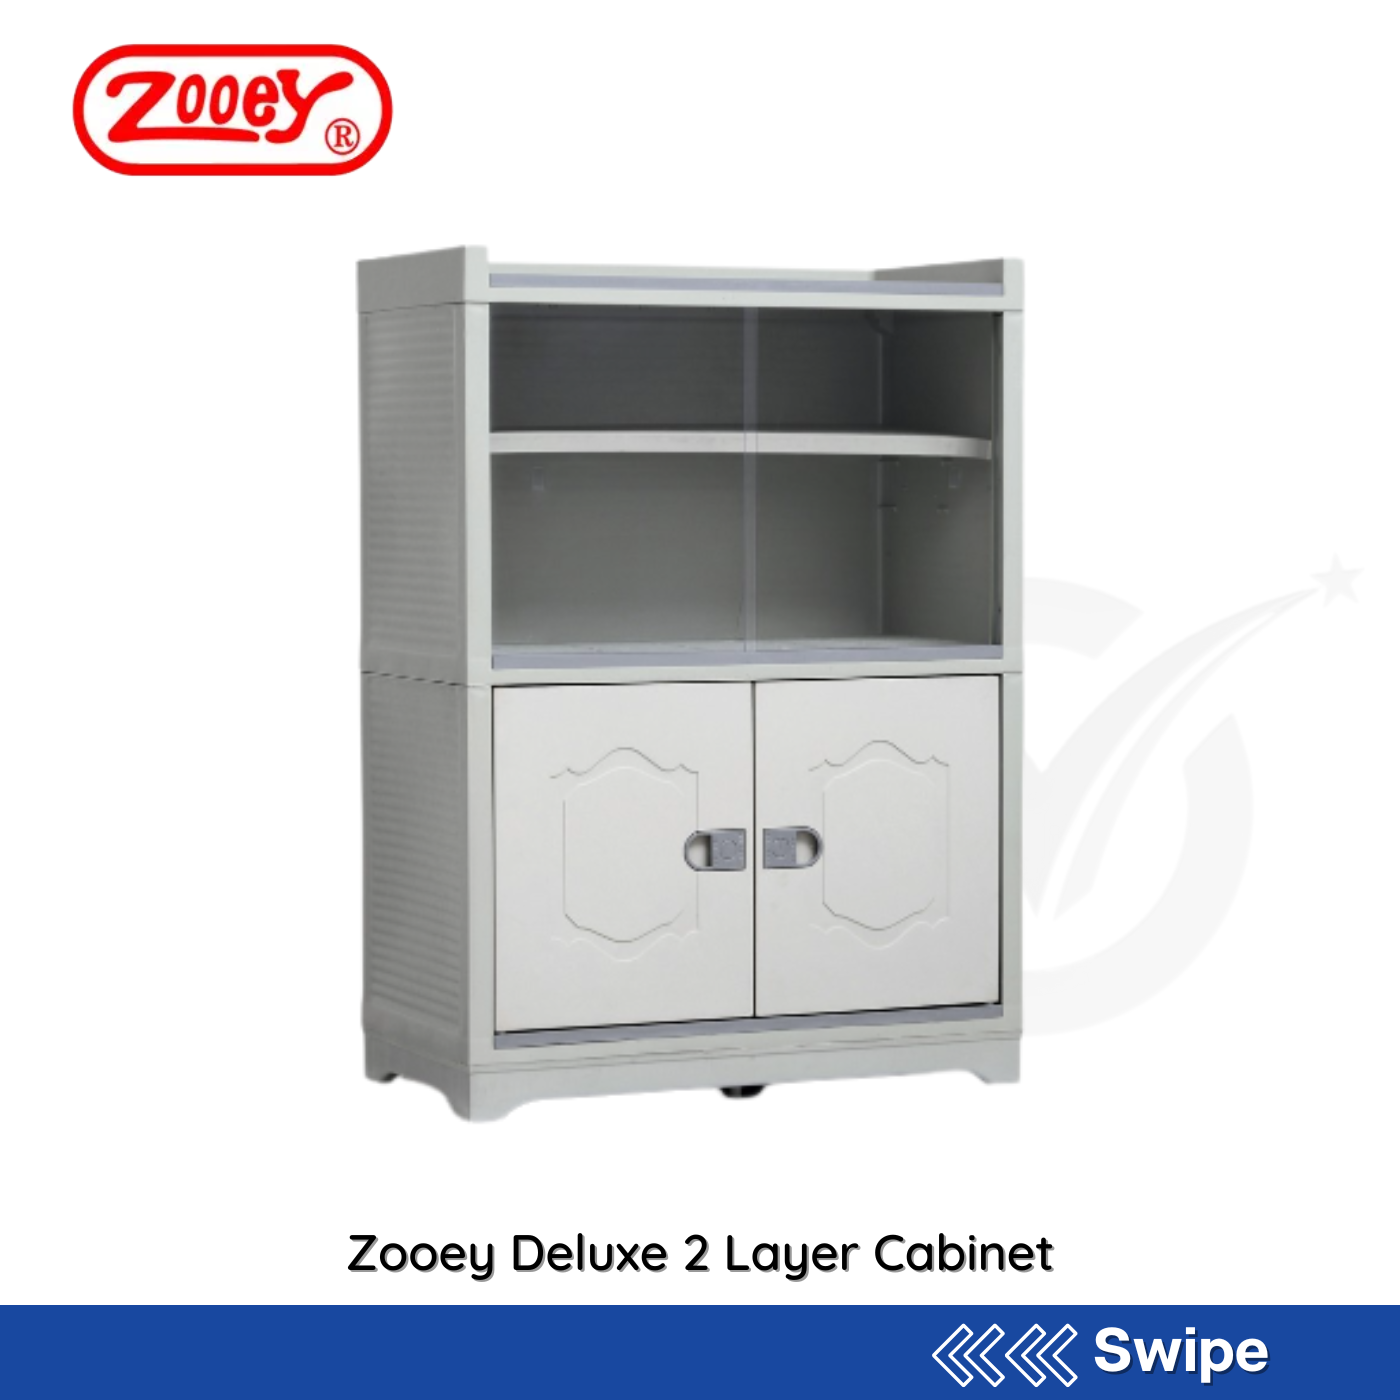 Zooey Deluxe 2 Layer Cabinets - People's Choice Marketing